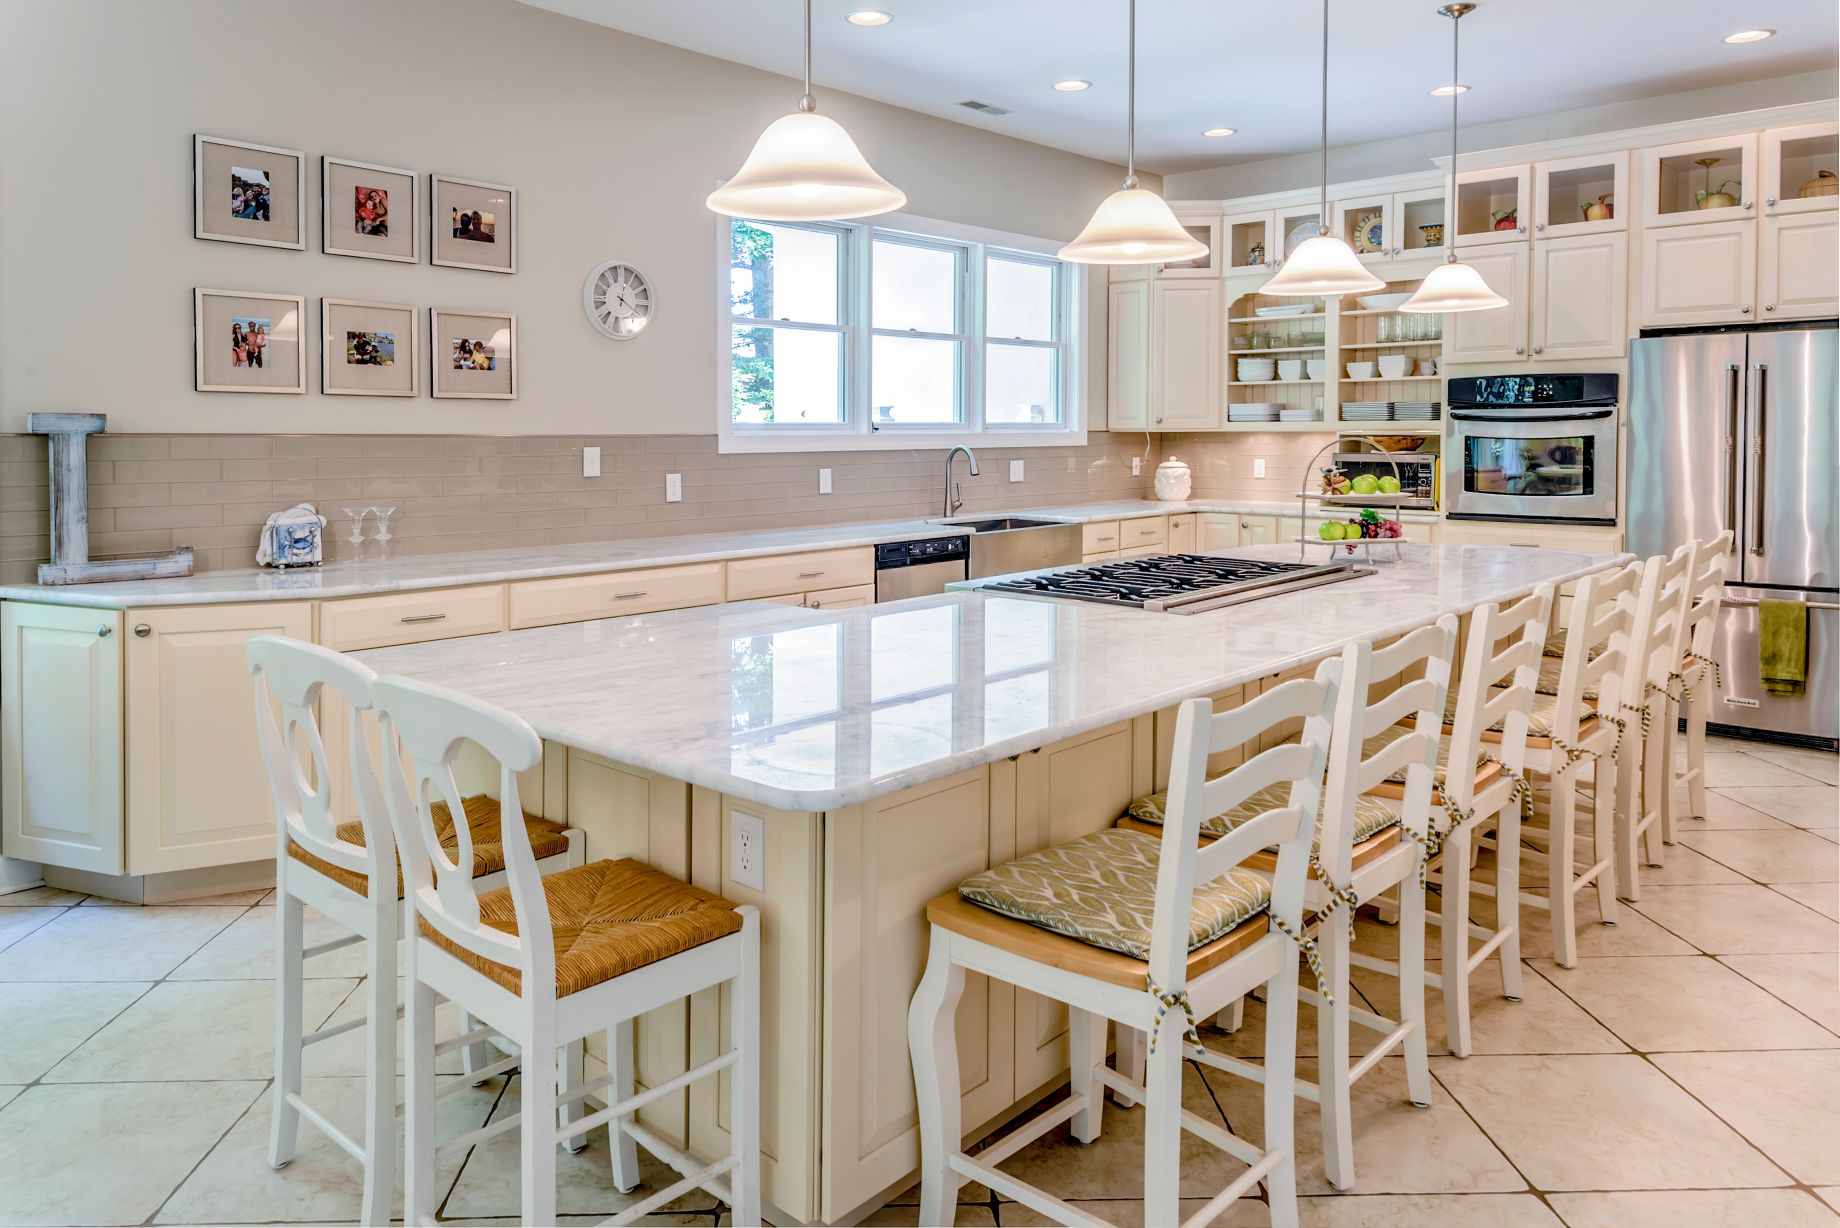 Addition in Juniper Court, Ocean Pines MD - Dining Area with Island, White Marble Countertop and White Tiles Flooring